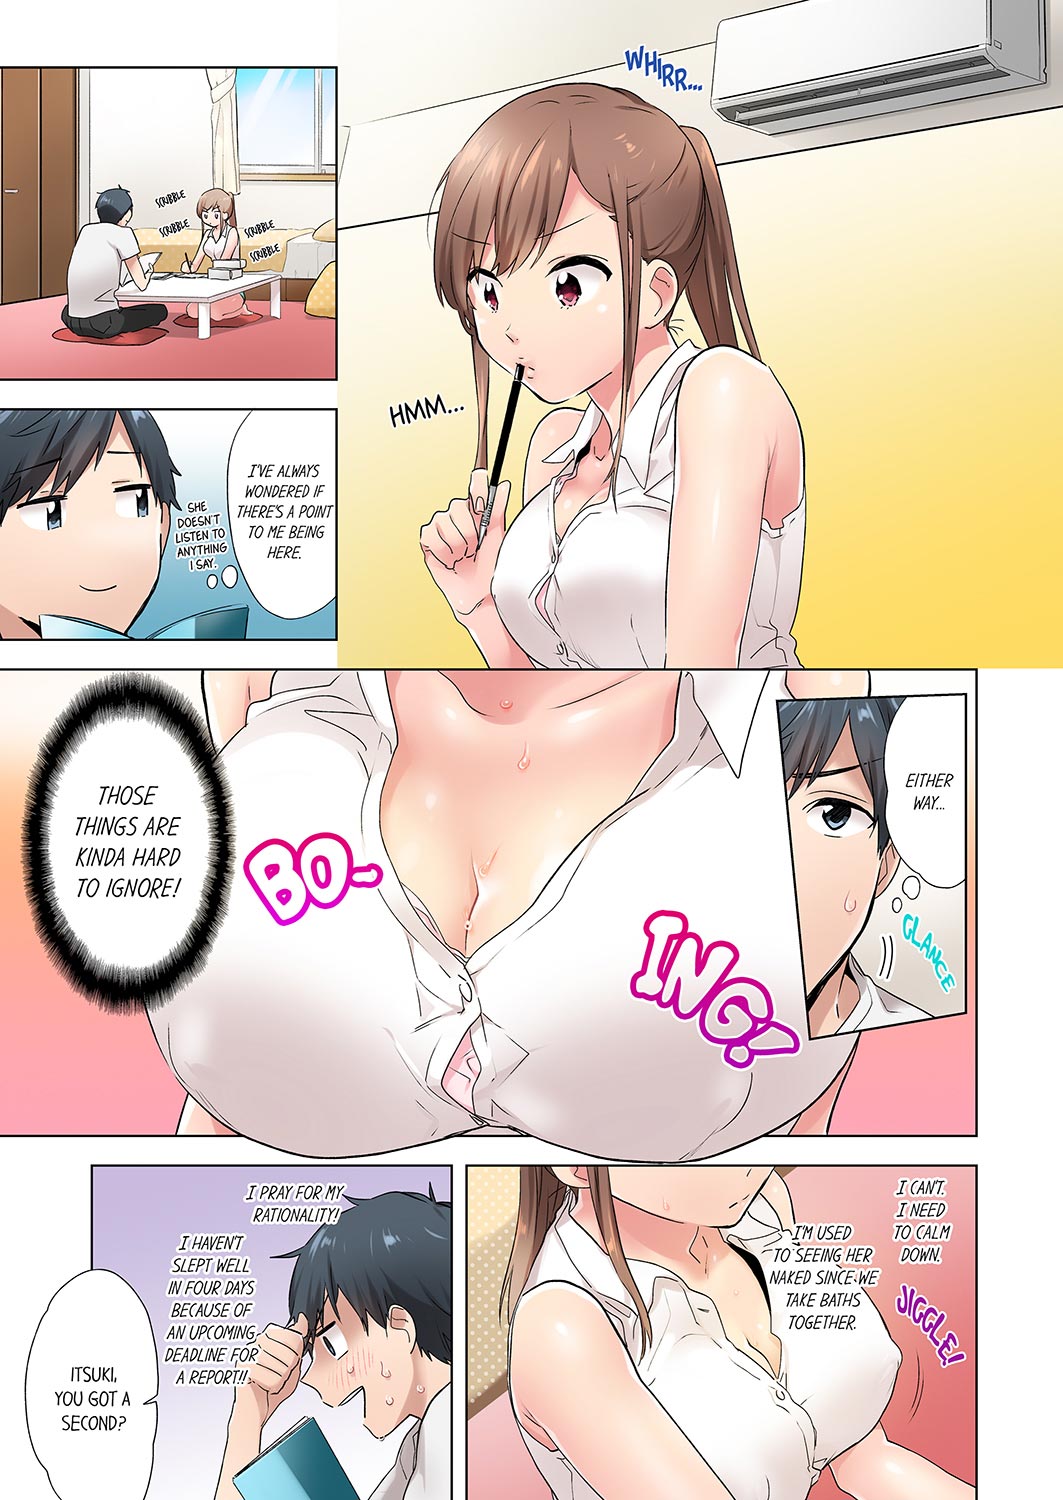 A Scorching Hot Day with A Broken Air Conditioner. If I Keep Having Sex with My Sweaty Childhood Friend… - Chapter 1 Page 3